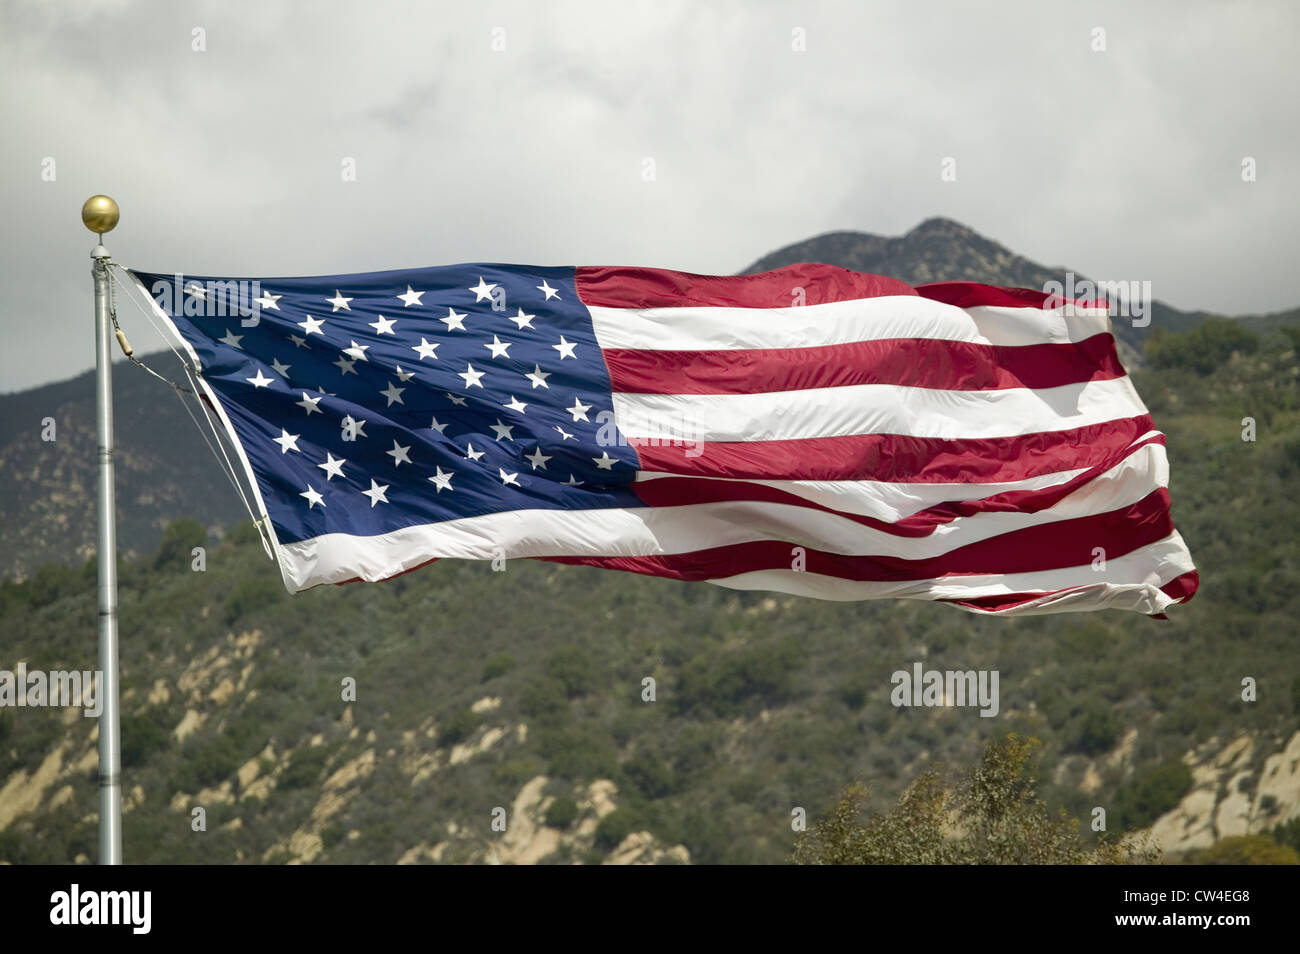 An American flag missing it's lower stripes as it blows in the wind Stock Photo